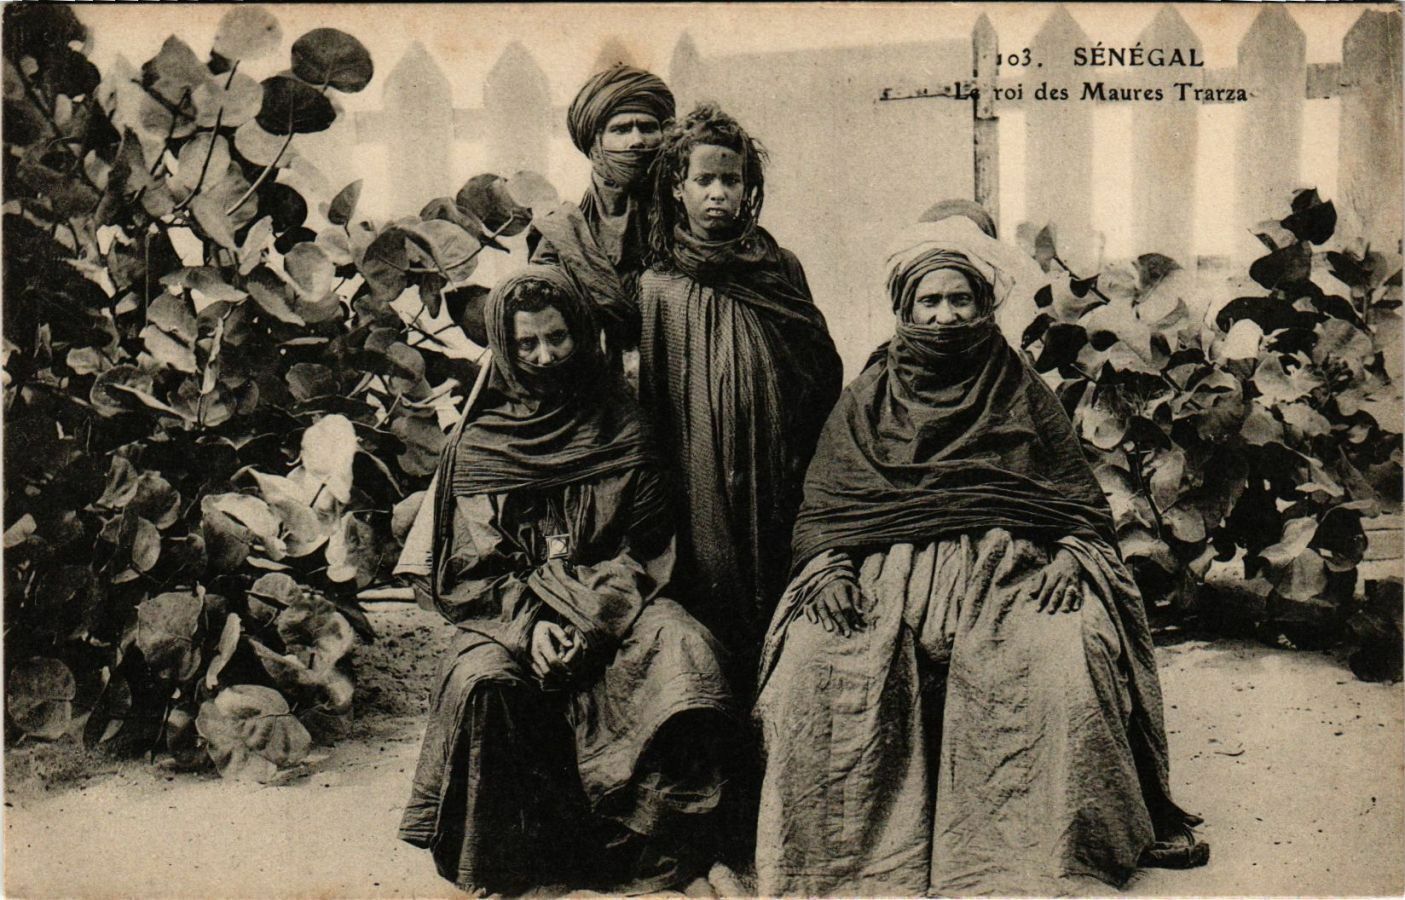 CPA AK SENEGAL-103. The King of the Moors Trarza (331128)